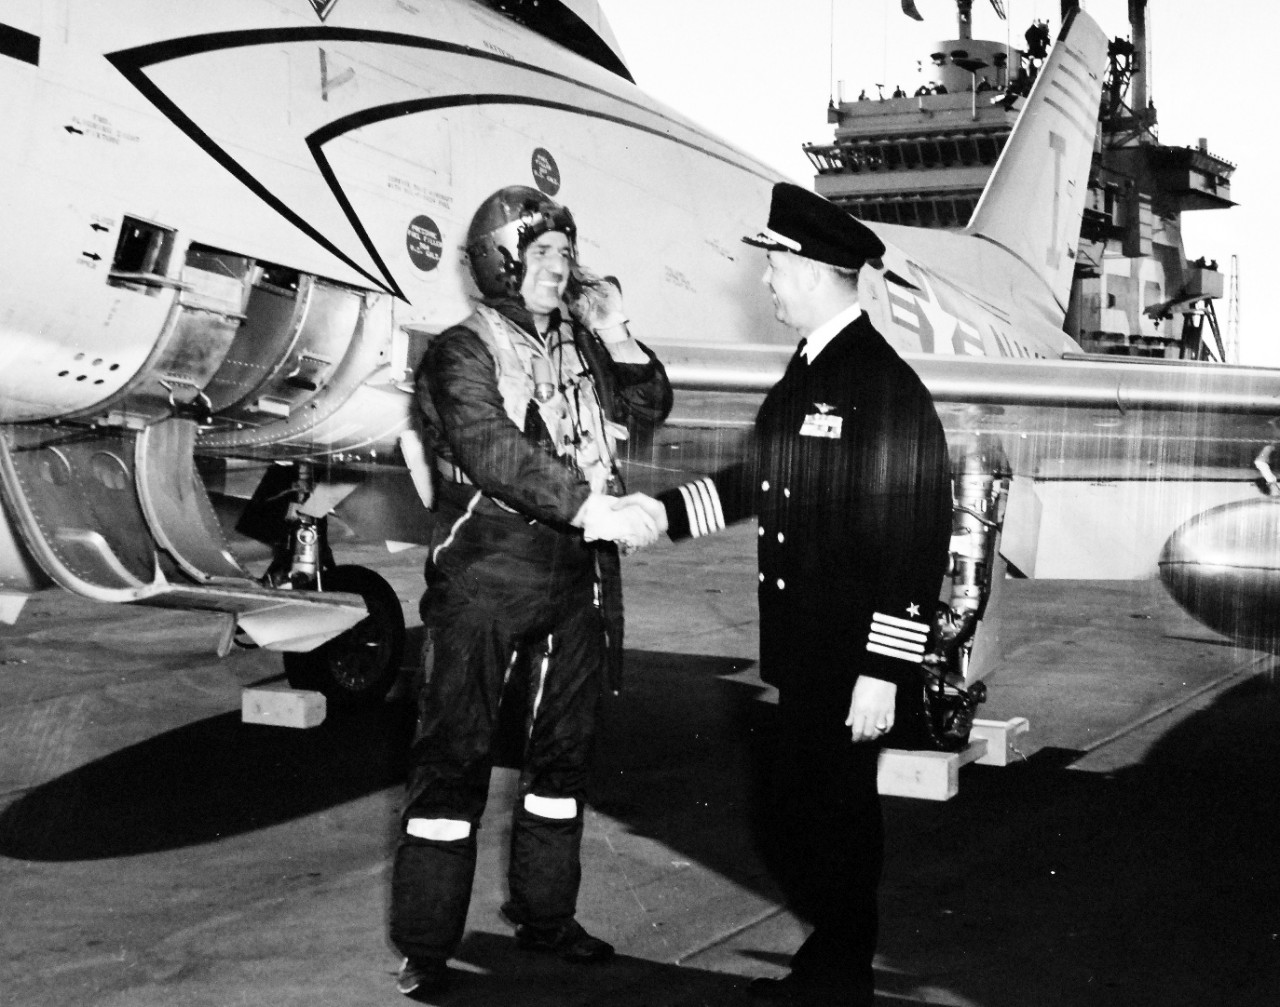 330-PS-7642 (USN 684245):  USS Forrestal (CVA-59), 1956.    Captain Roy Lee Johnson, USN, Commanding Officer of USS Forrestal (CVA-59), congratulates Commander Ralph L. Werner, USN, after making the  first landing onboard the giant carrier.   Werner piloted the U.S. Navy FJ-3 “Fury” jet aircraft in the background.  Werner commanded Air Task Group 181 (ATG-181) and landed approximately 2:40 (EST), January 3, 1956 while the aircraft carrier, operating at sea east of Norfolk, Virginia, was undergoing a series of routine tests.  Commander Werner made three touch-and-go landings before making the first full-stop landing.  A few hours later, piloting the same aircraft, he also made the first catapult launch from the carrier.   Aircraft used for these trials are based at the U.S. Naval Air Station, Oceana, Virginia.  Later, at approximately, 2:45 (EST), Commander W.M. Harnish, USN, Commanding Officer, Squadron 21 (a unit of ATG-181), piloting a U.S. Navy FJ-3 “Fury” made the second landing on board Forrestal.    Commander Harnish’s father, Mr. W.E. Harnish, was the Professor of Education at the University of Illinois.  Lieutenant Vincent Darcey, USN, of ATG-181, was the Landing Signal Officer for both landings.  Both aircraft were painted with the new white and grey “atomic” paint scheme.    Photograph released January 4, 1956.   Offical U.S. Navy Photograph, now in the collections of the National Archives.  (2015/02/18)  